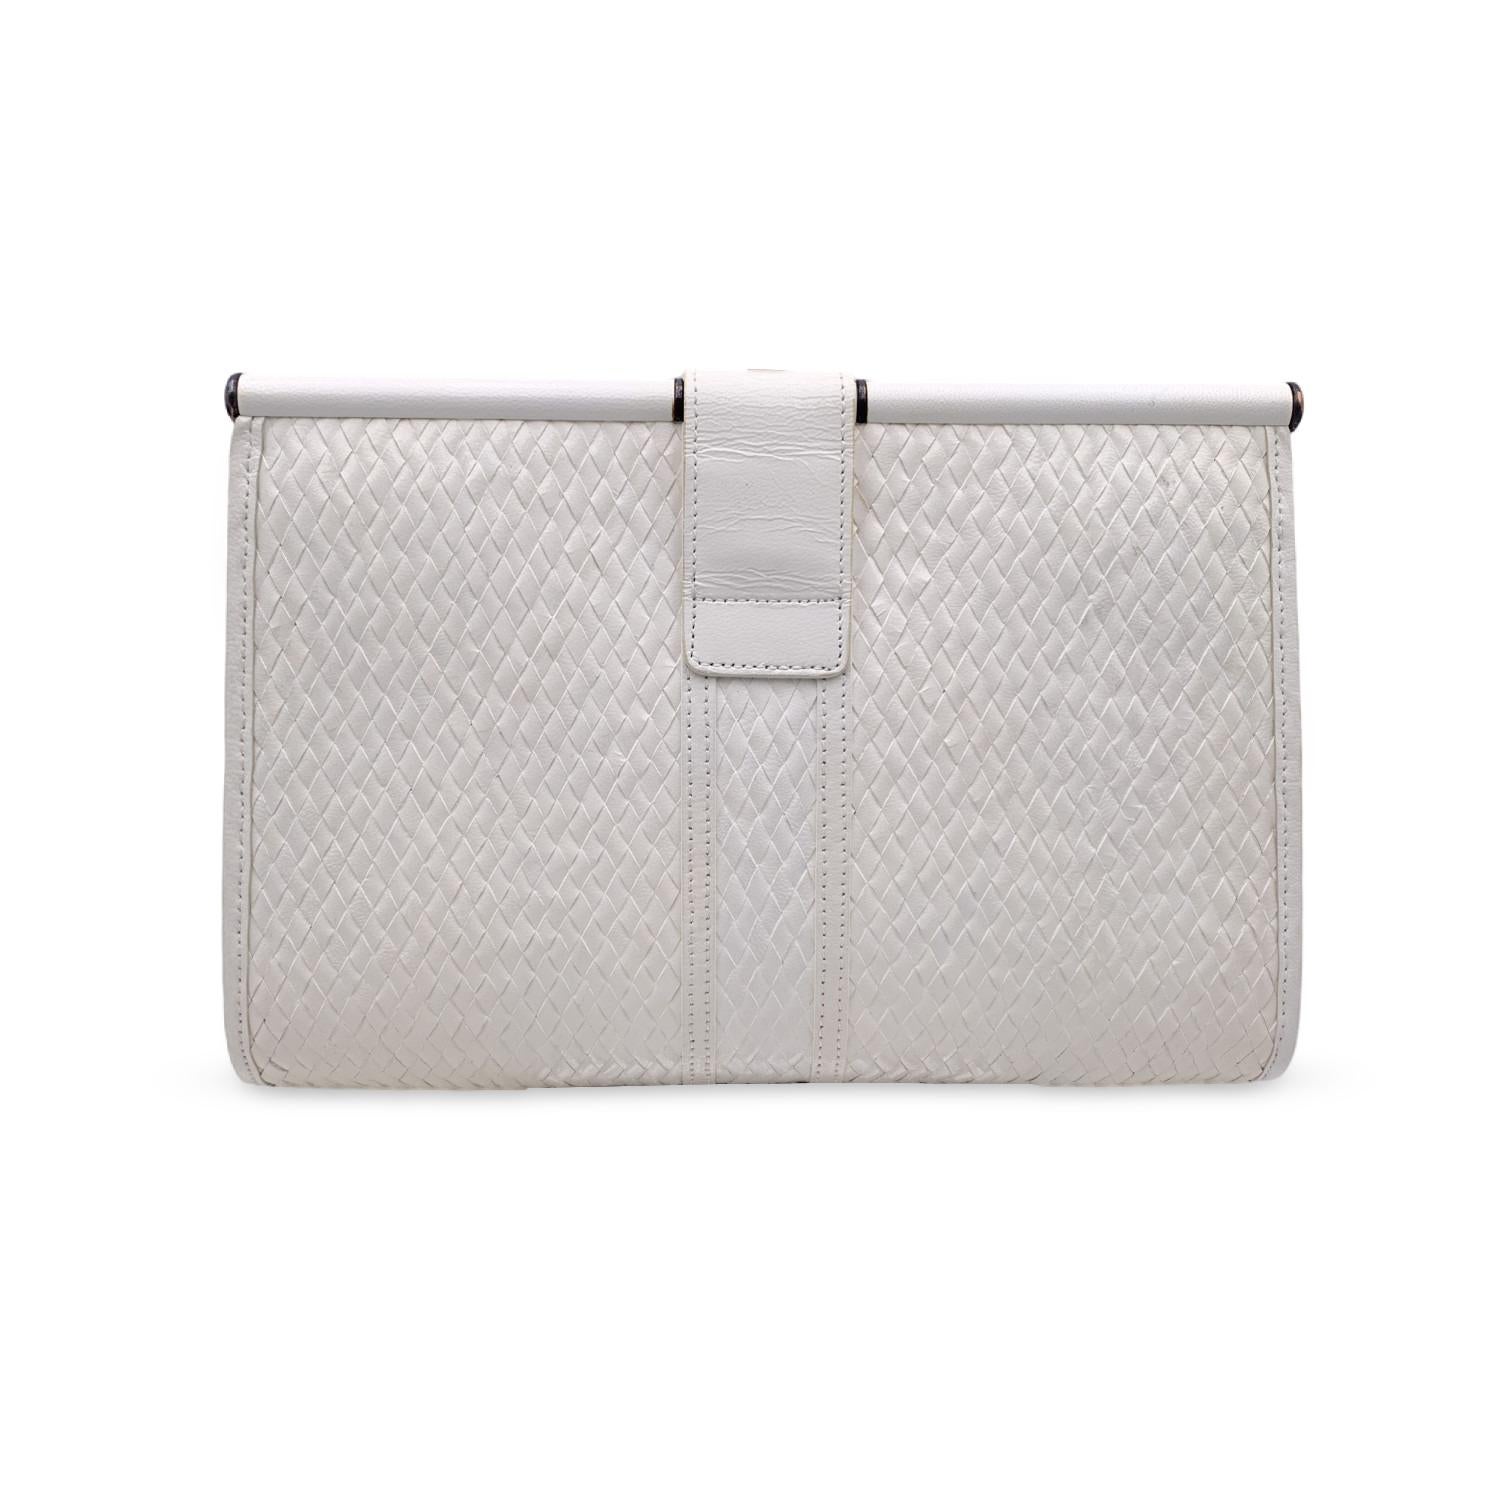 Yves Saint Laurent Vintage White Woven Leather Clutch Bag Handbag In Excellent Condition In Rome, Rome